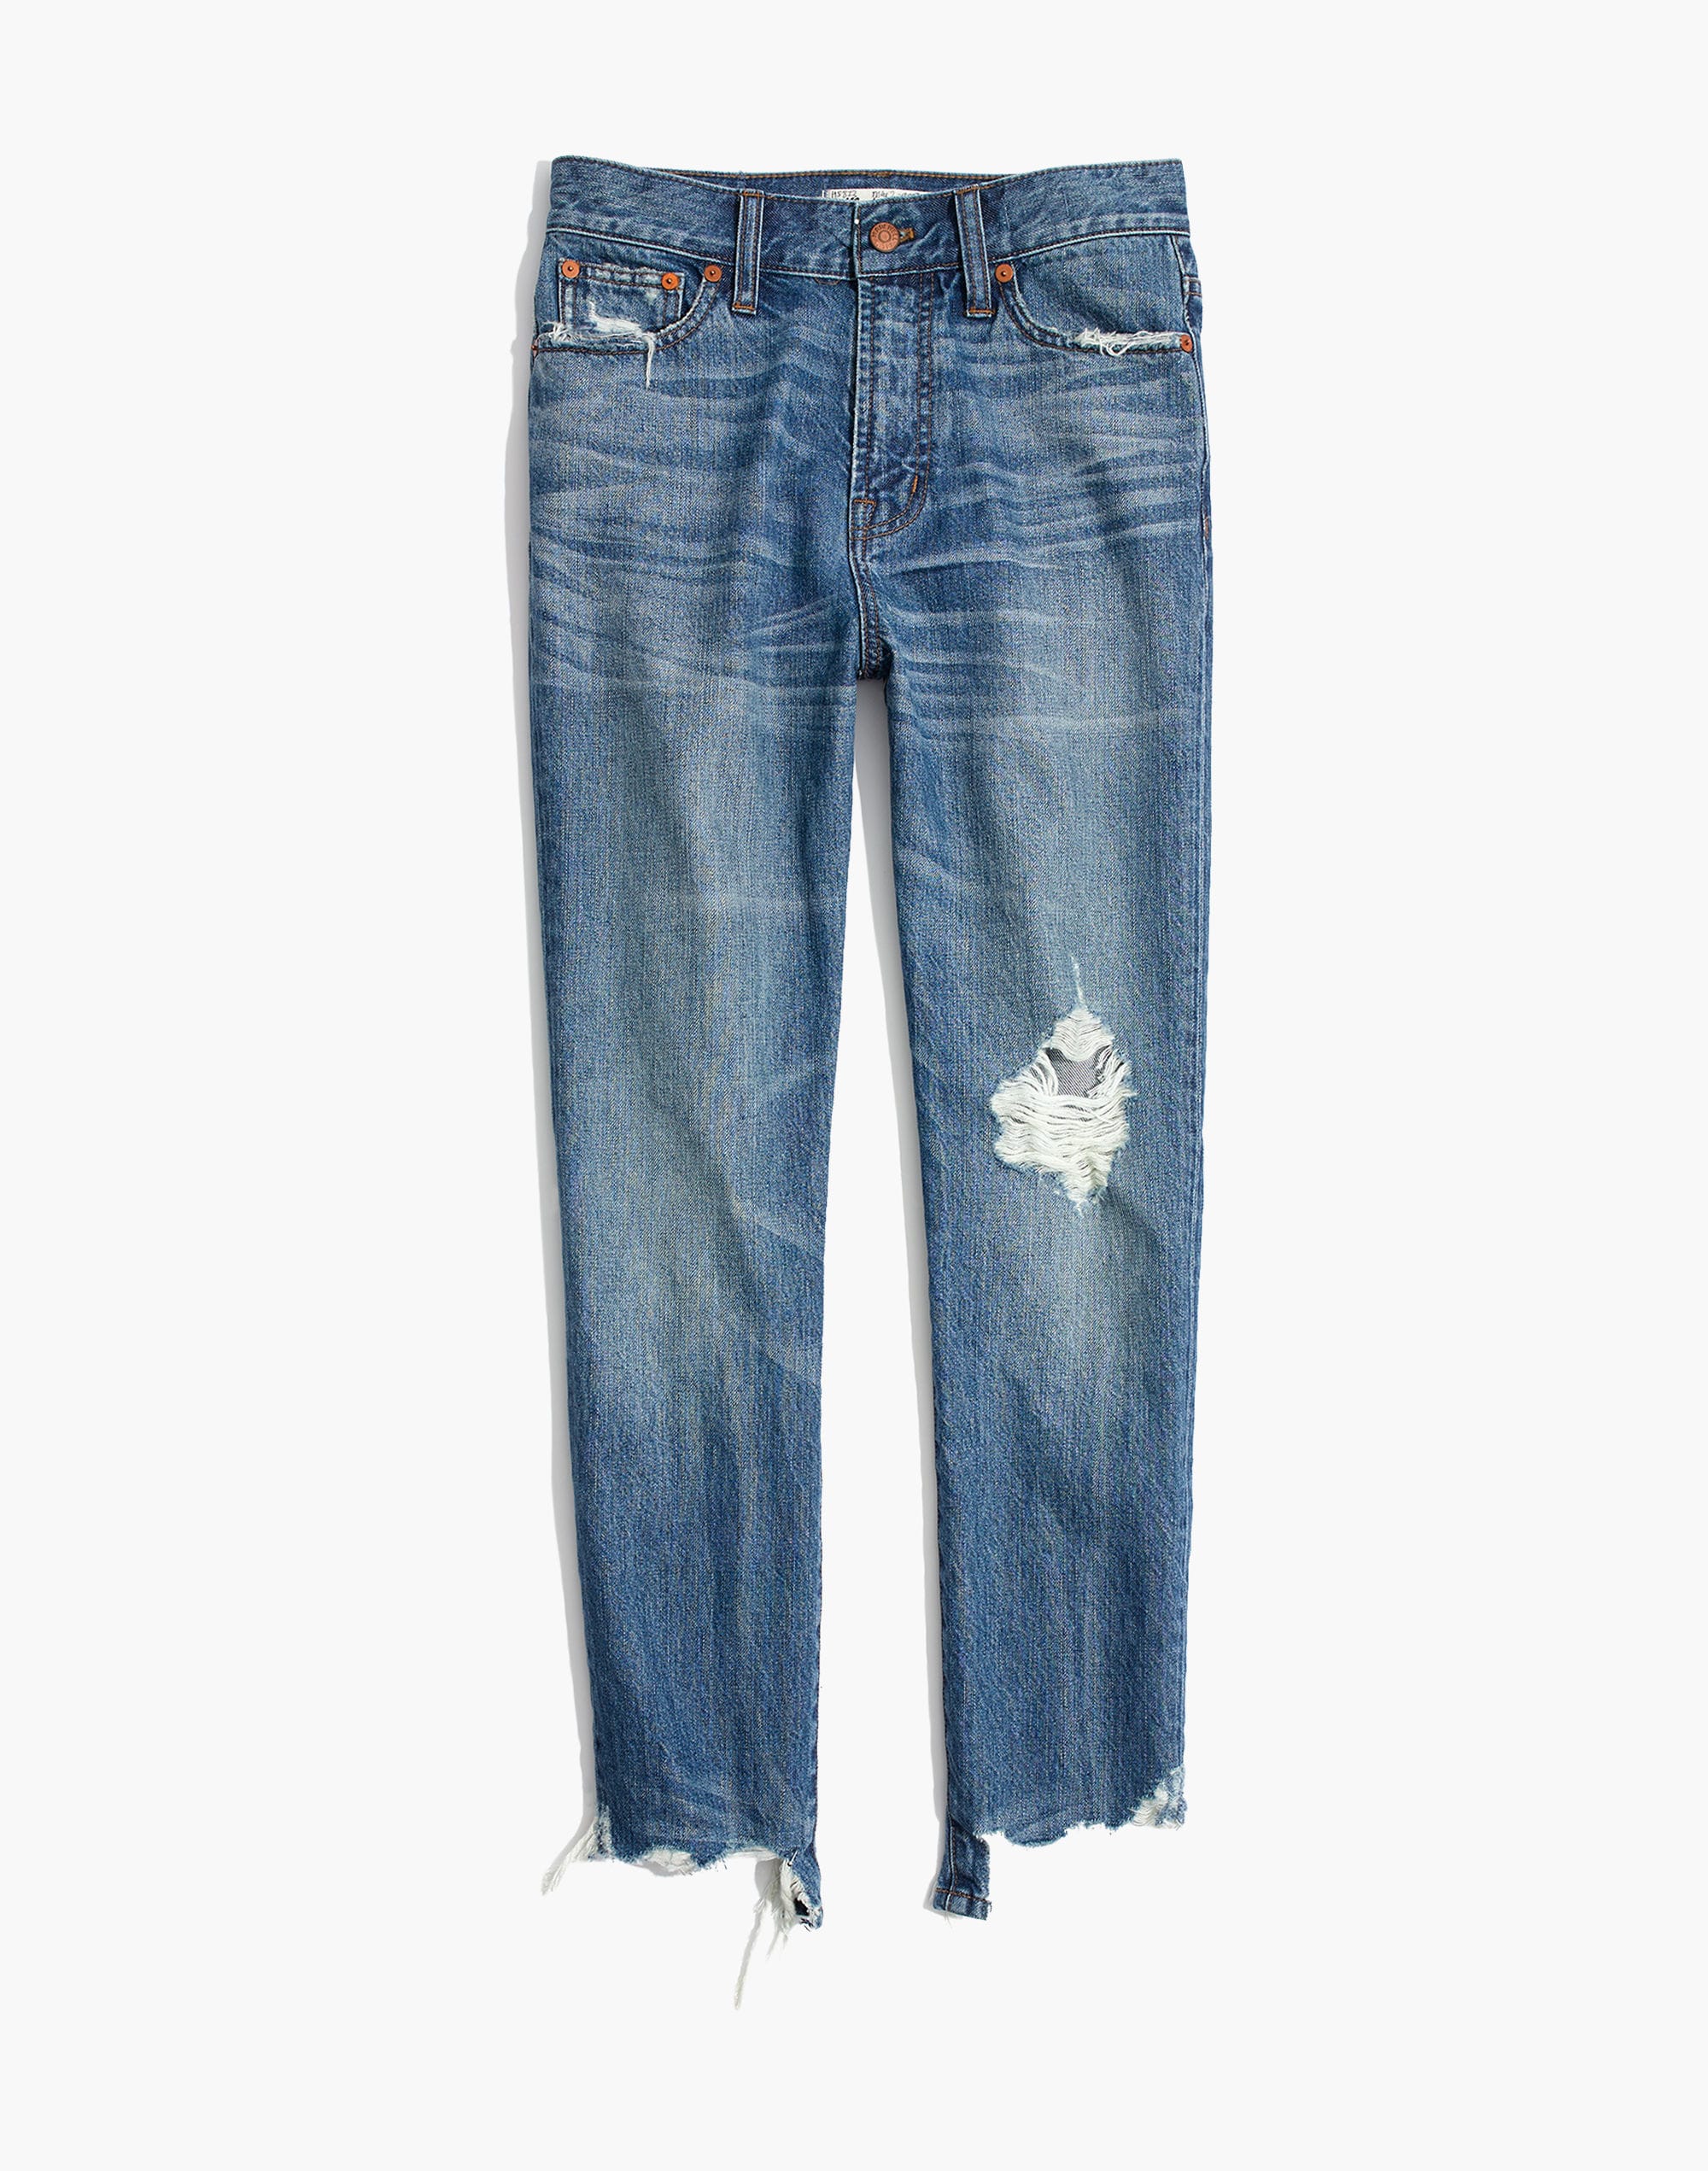 The perfect summer sunflower jeans, RE.STATEMENT